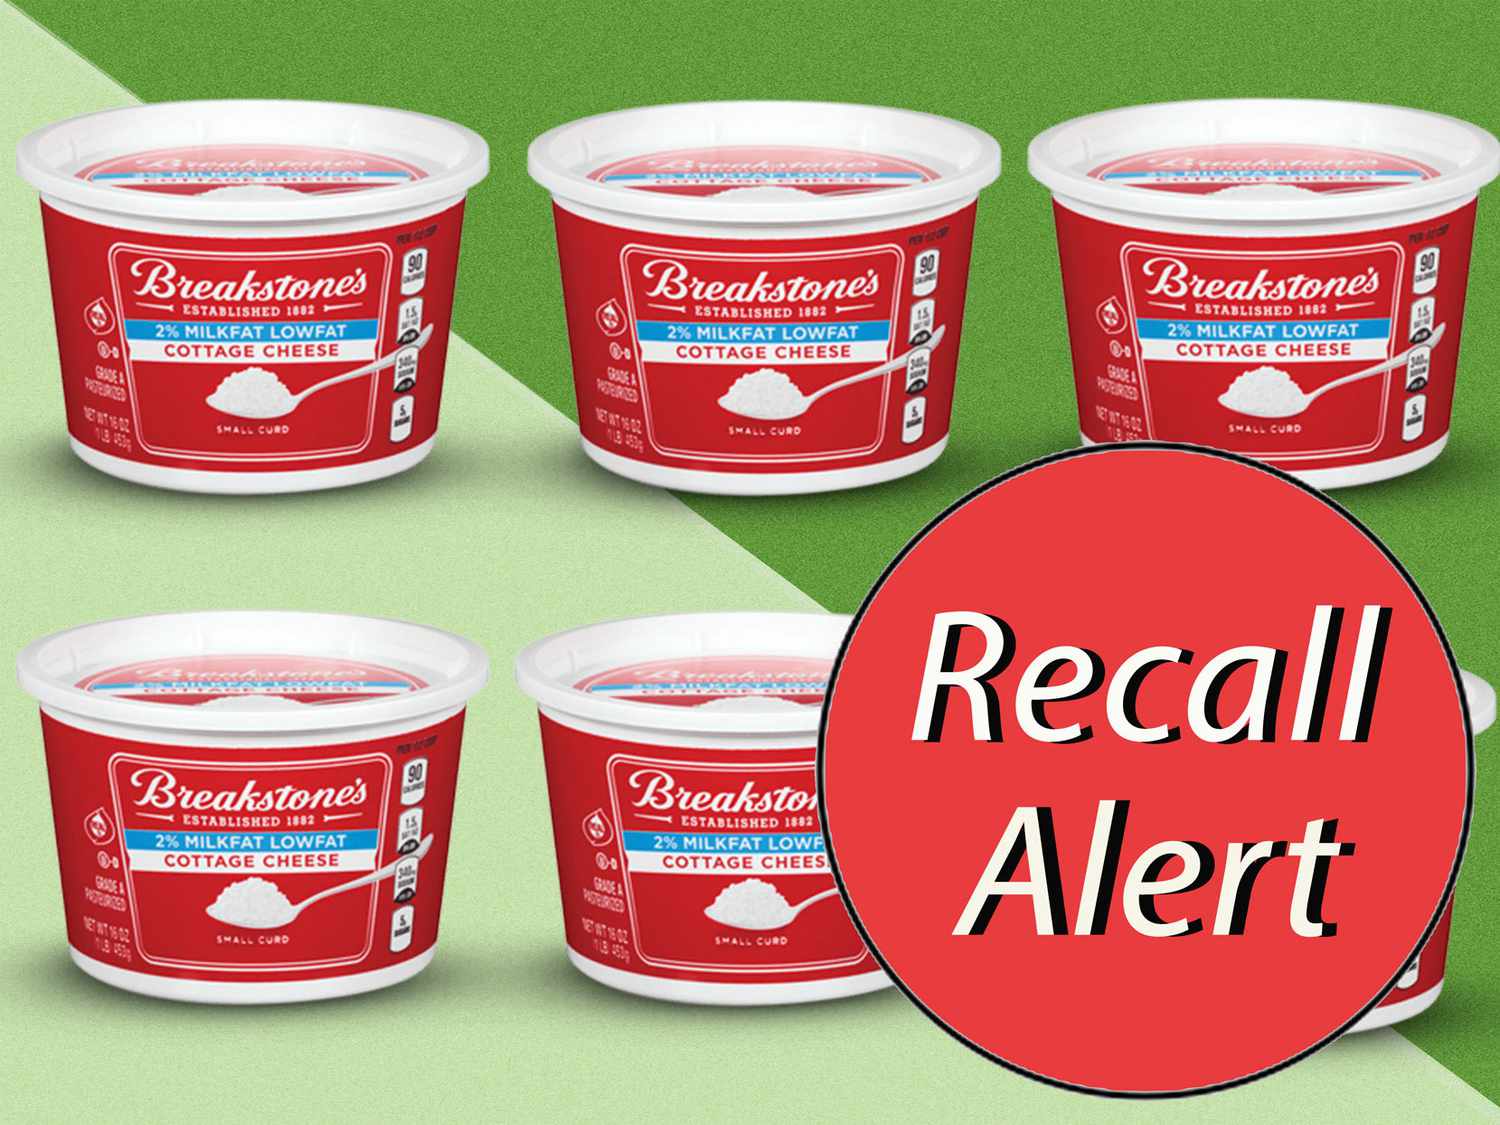 Tubs of Breakstone's Cottage Cheese with Recall Alert sticker overlaying image